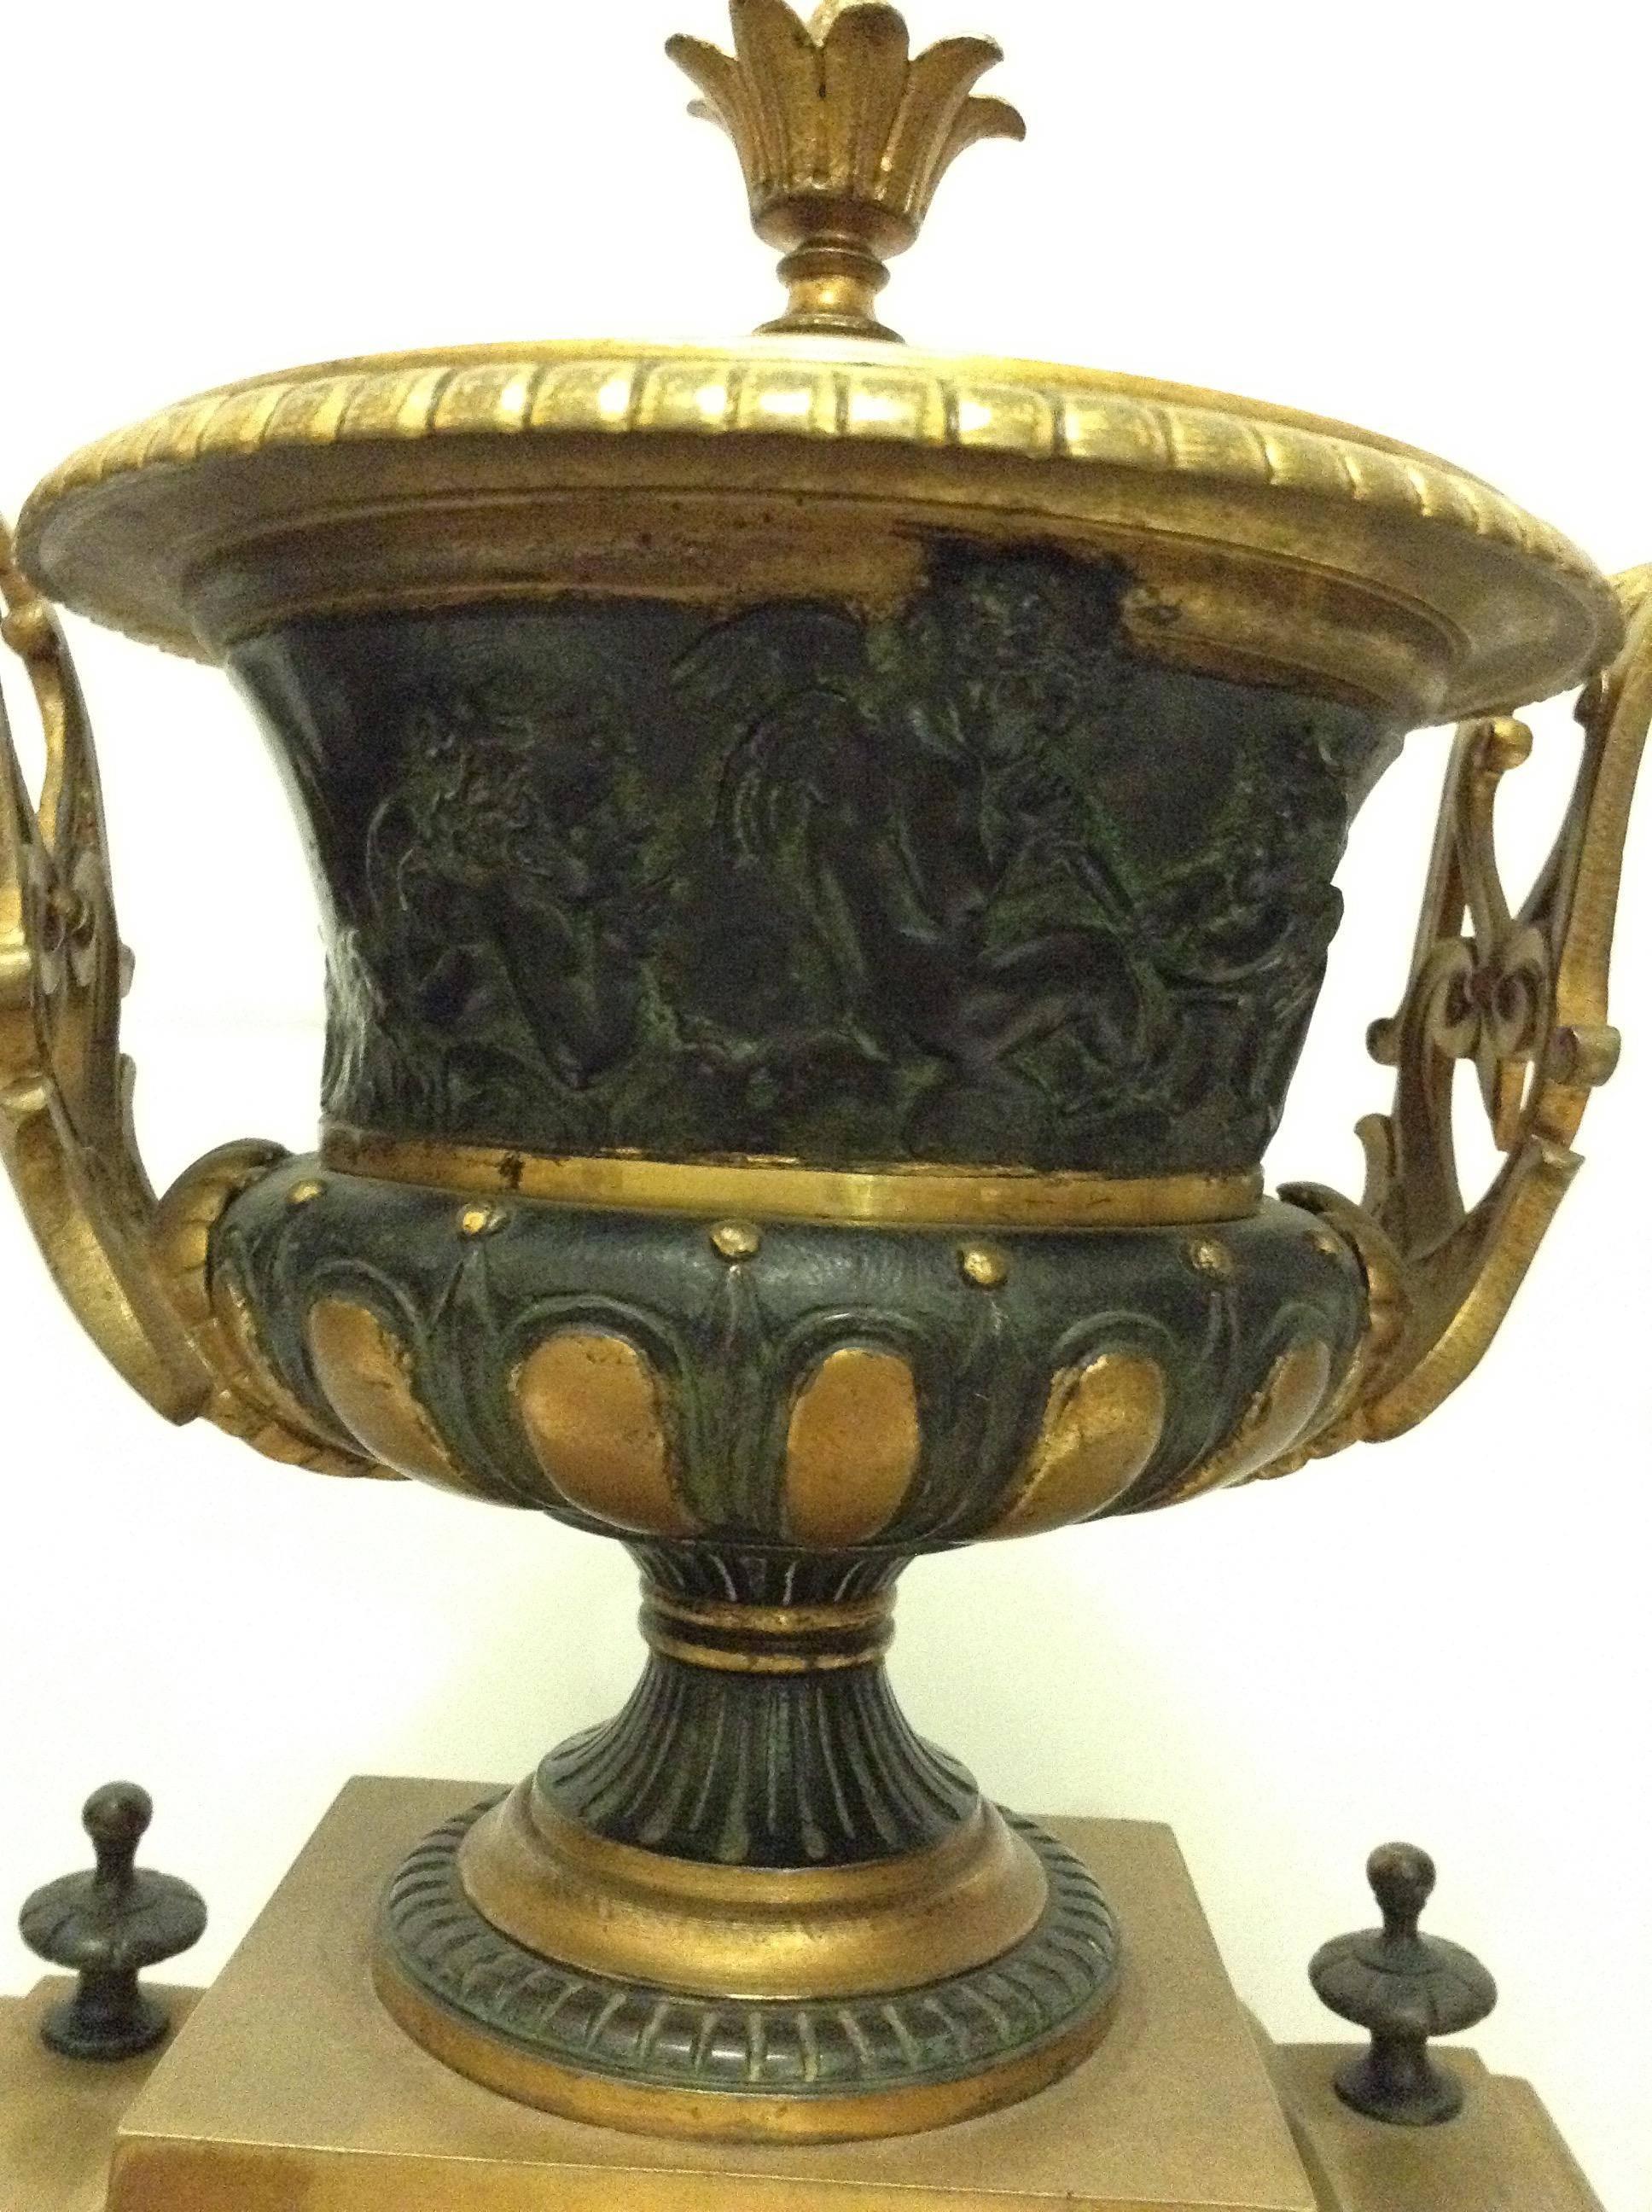 Hand-Crafted French Bronze Clock Garniture with Urn and Lion Motif by Japy Freres For Sale